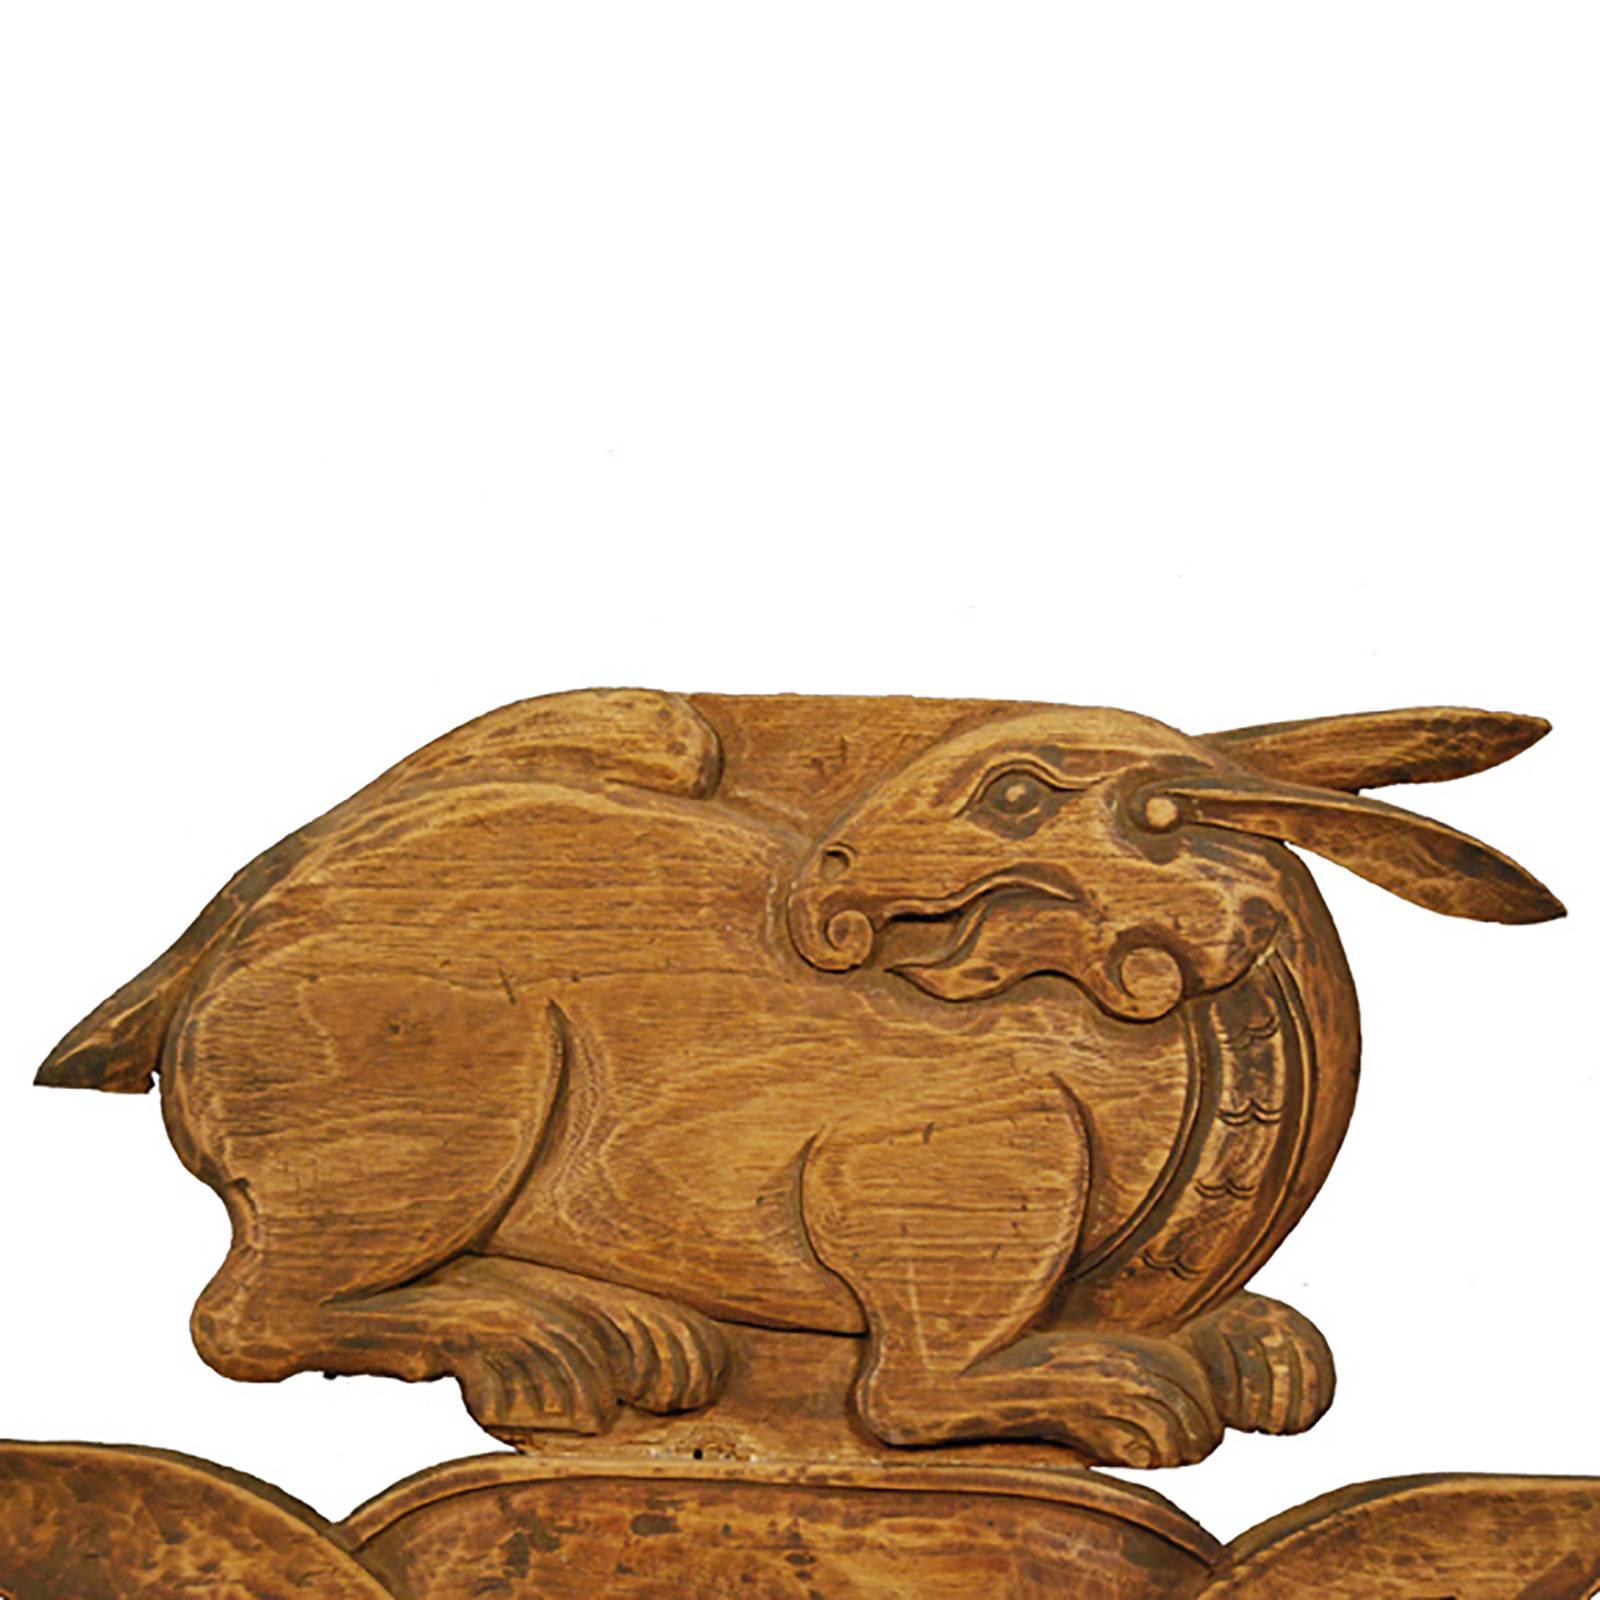 This 19th century rabbit charm was hand-carved of aromatic camphor wood and was originally an architectural ornament on a Qing dynasty home. Perhaps the owner of the home was born in the year of the rabbit, one of the 12 animals in the Chinese